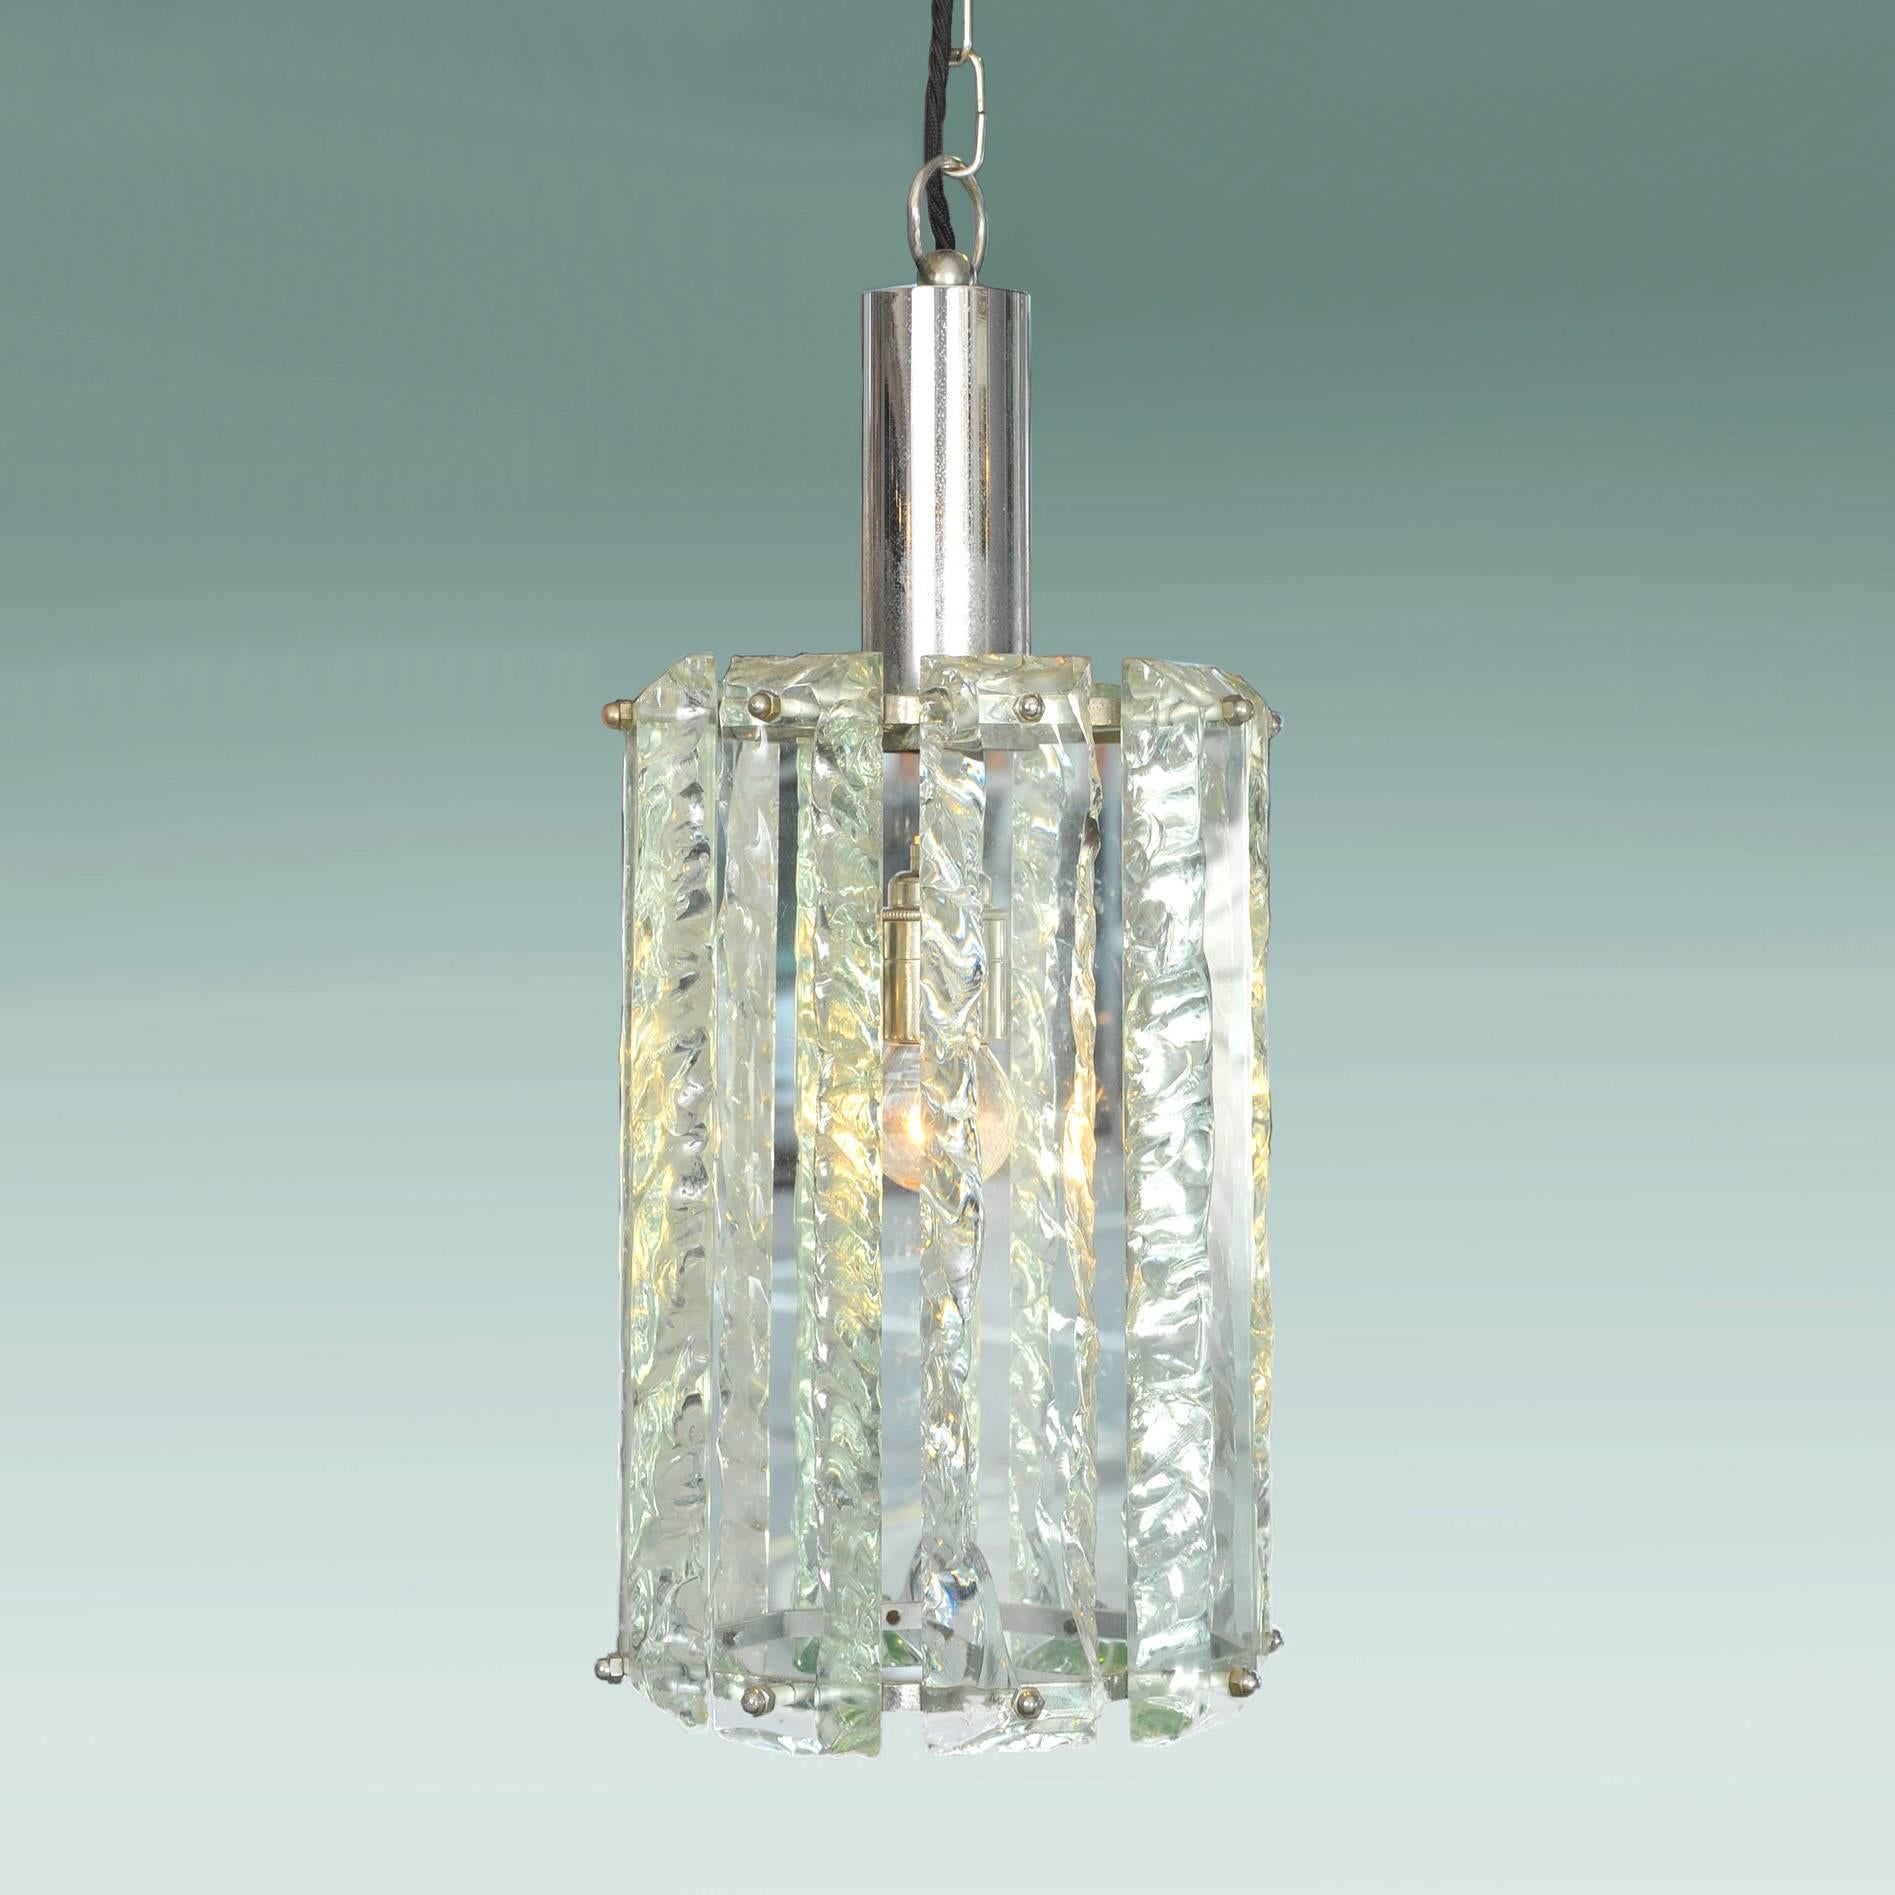 Fine Murano glass pendant of faceted drops in very pale eau de nil forming a circular shade supported by its original chrome frame.